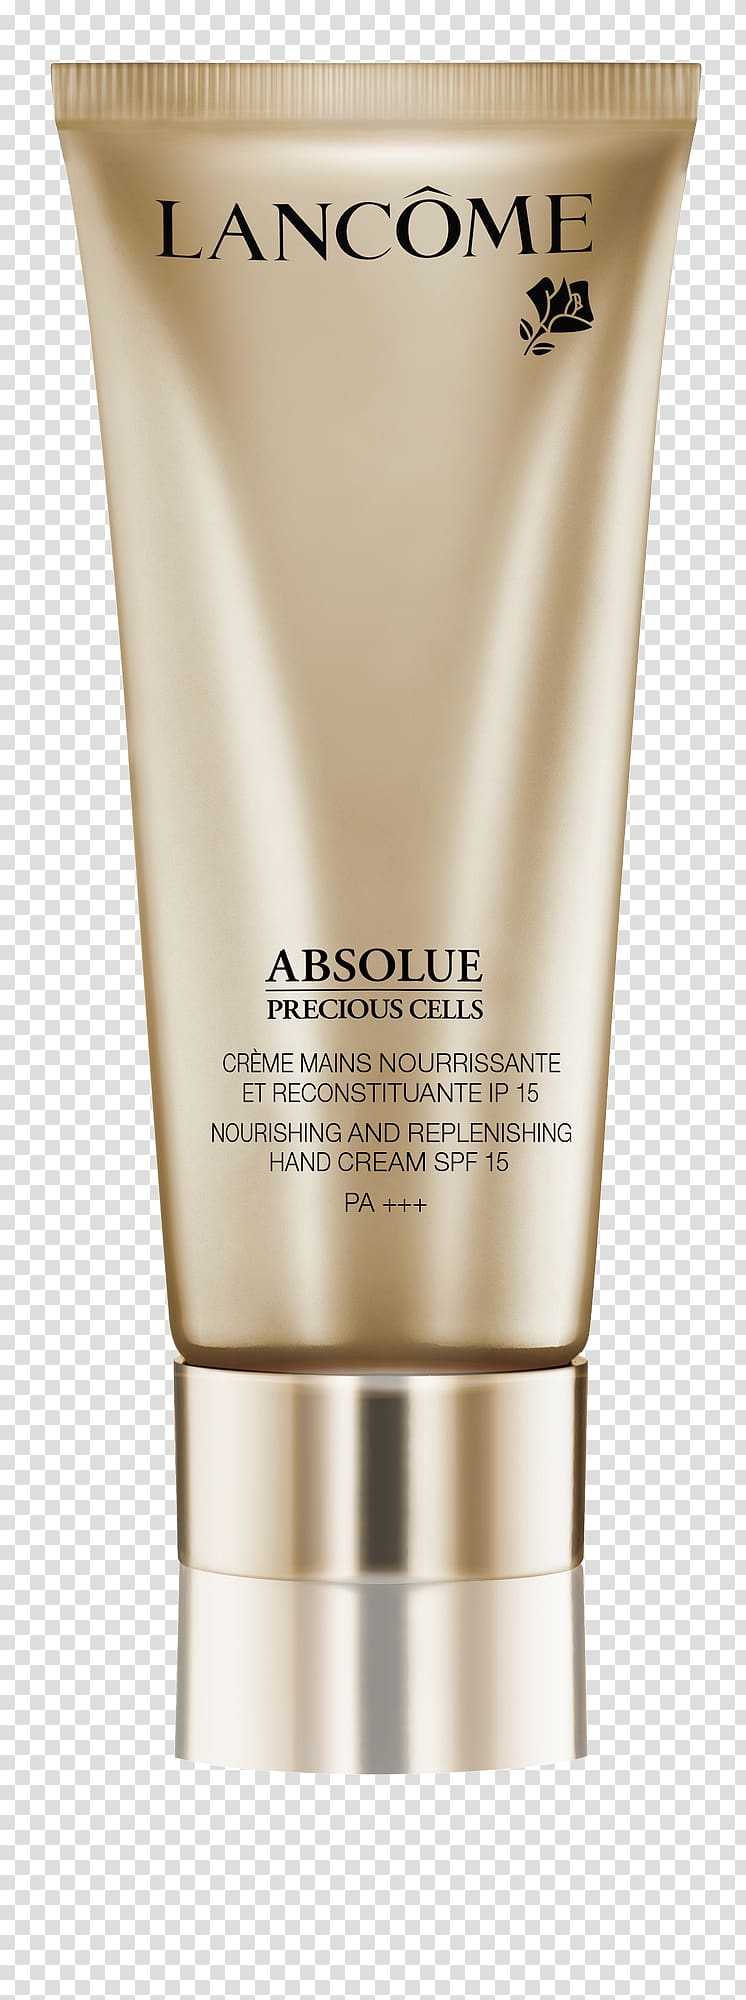 Lancôme Absolue Precious Cells Day Cream Lotion Lancôme Absolue Precious Cells Day Cream Skin, perfume transparent background PNG clipart